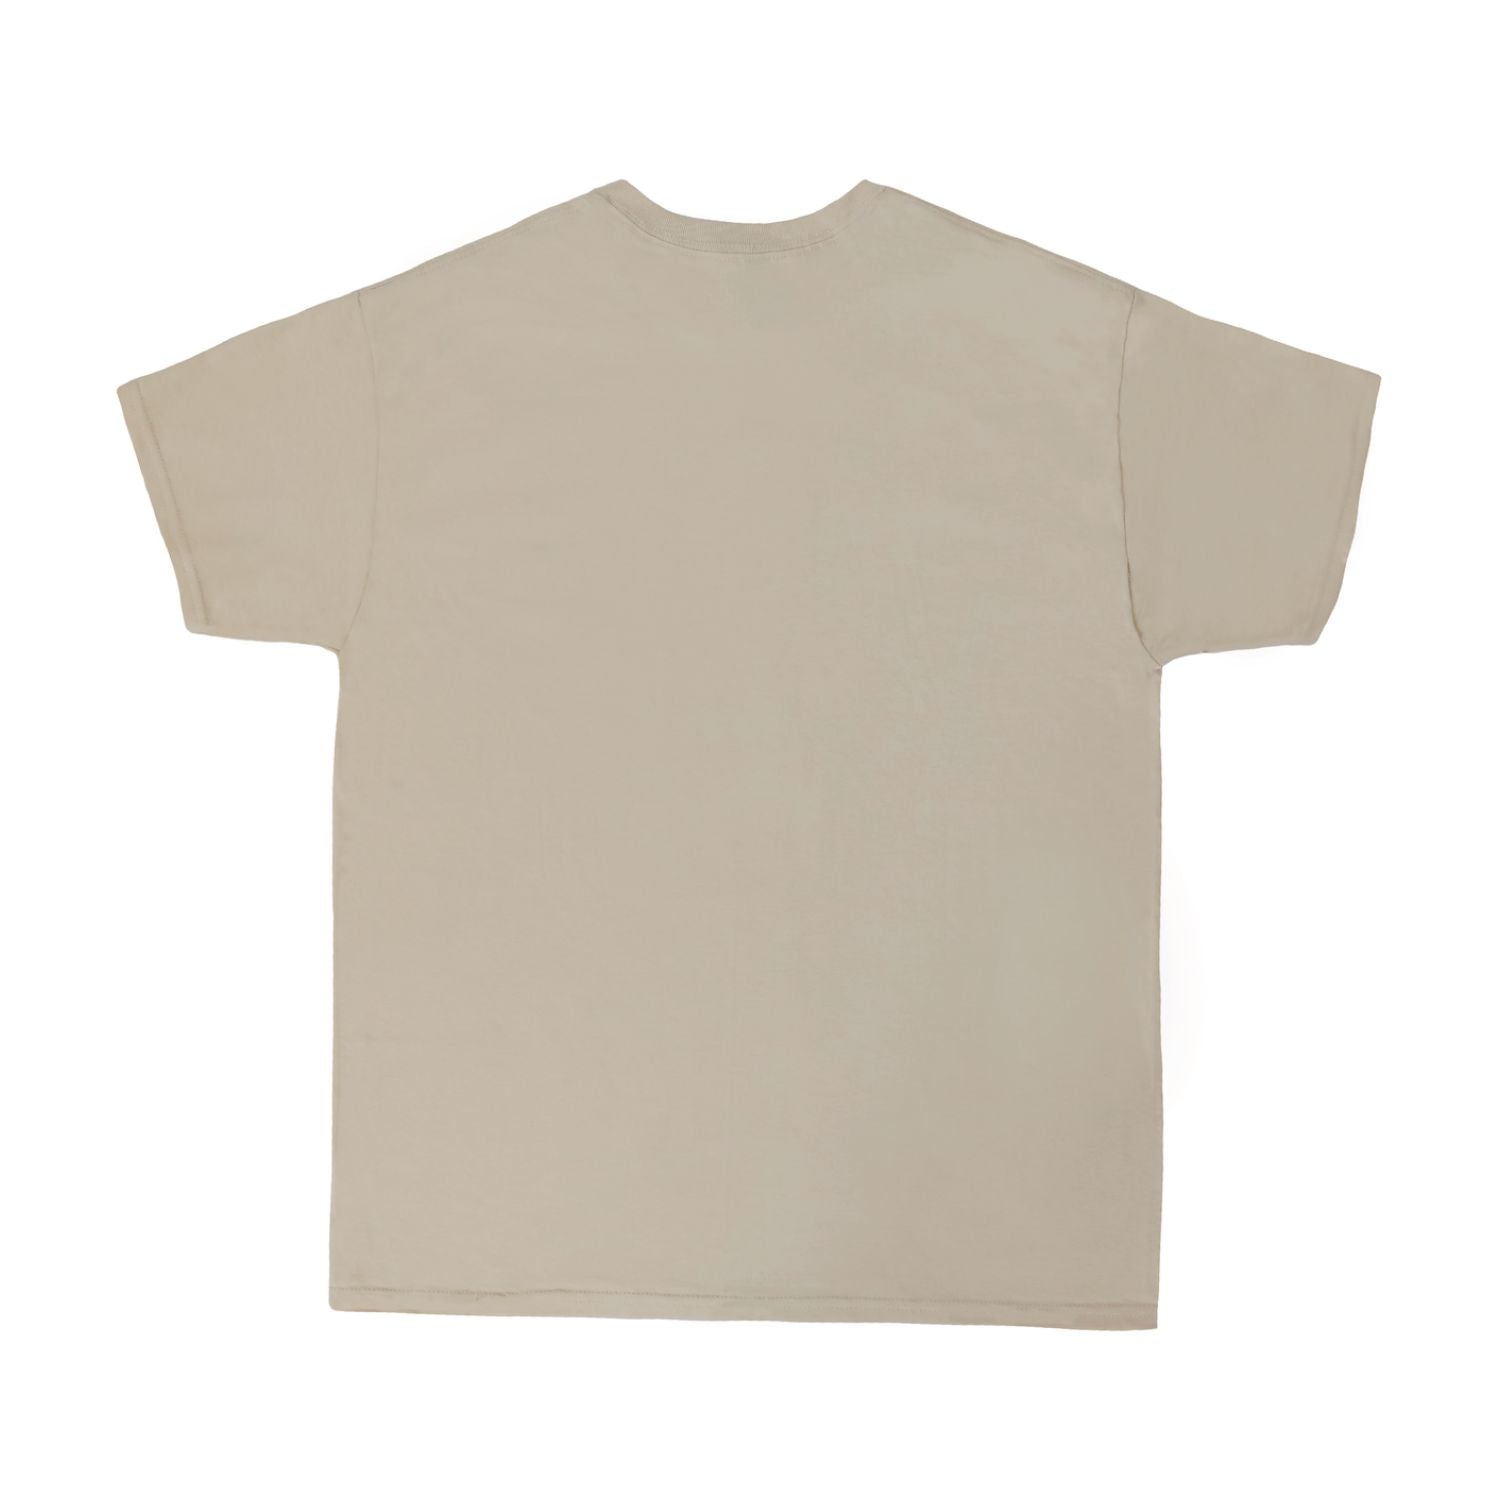 The Baby Cubby Cool Dad Club Tee Shirt - Sand